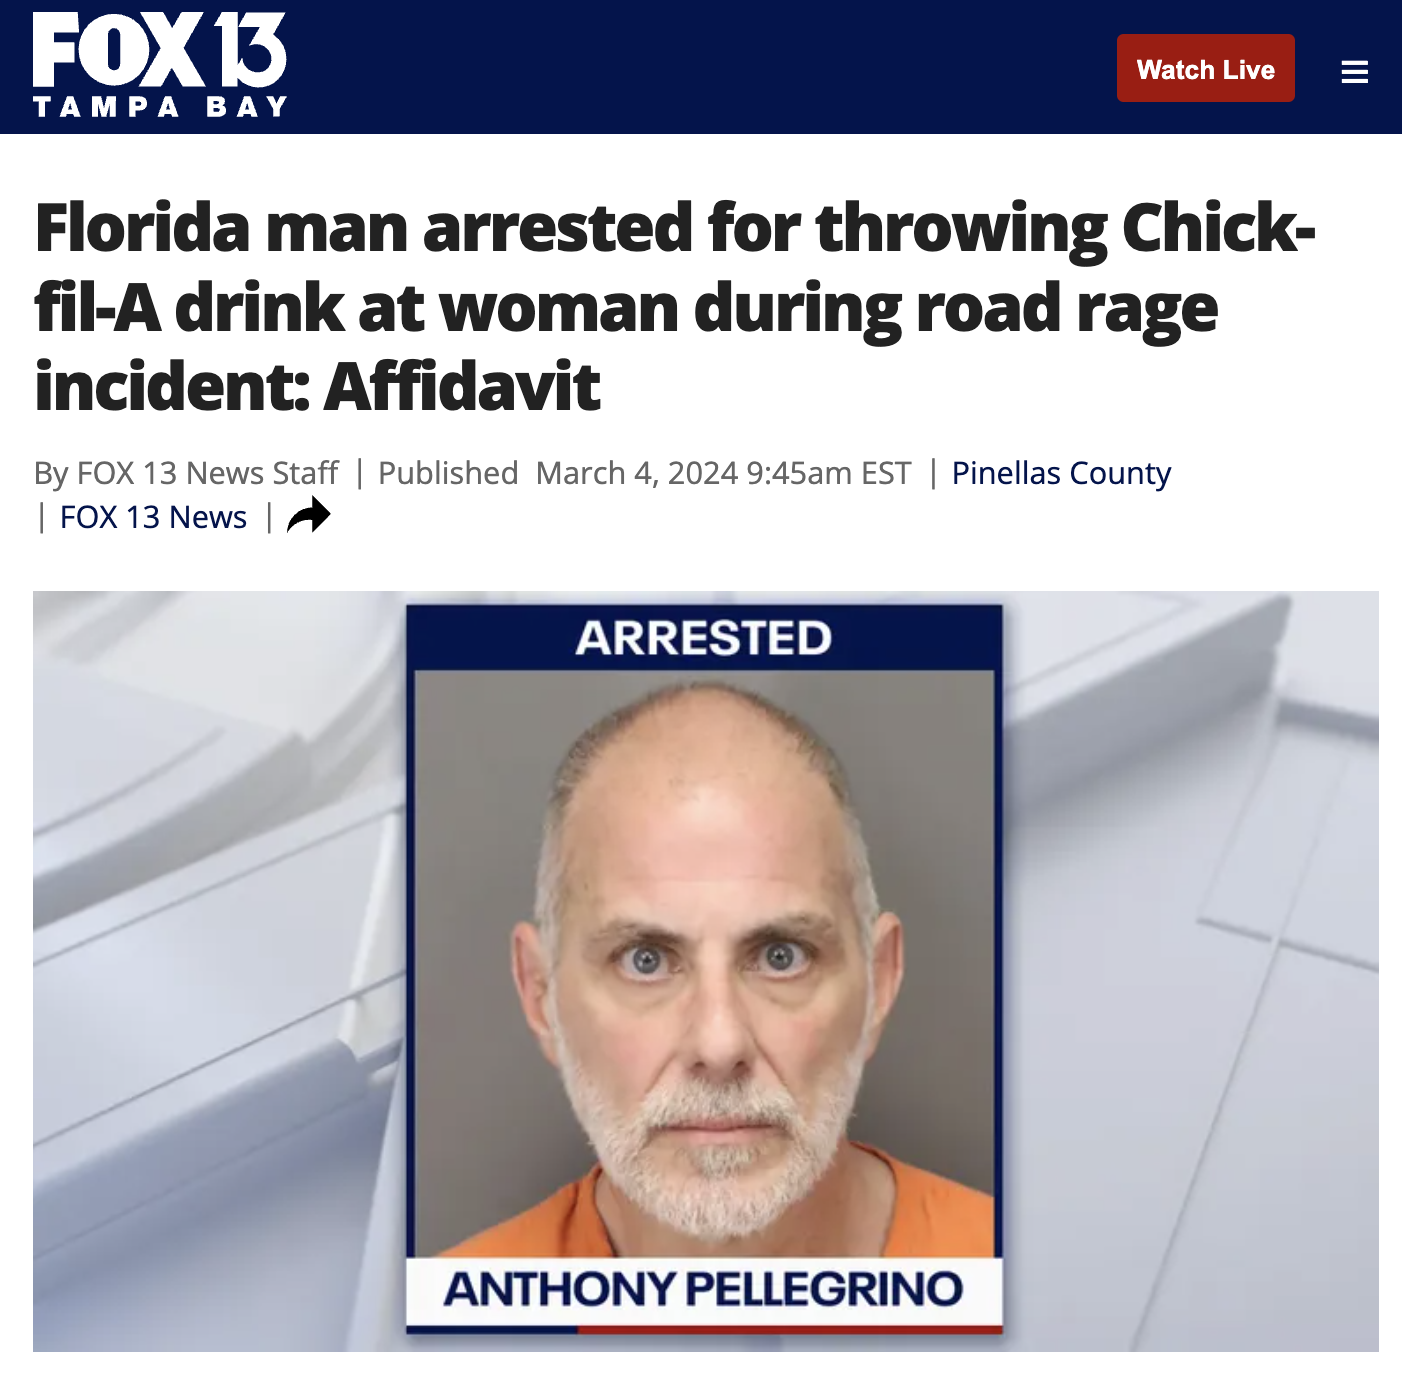 jaw - Fox 13 Tampa Bay Watch Live Florida man arrested for throwing Chick filA drink at woman during road rage incident Affidavit By Fox 13 News Staff | Published am Est | Pinellas County Fox 13 News Arrested Anthony Pellegrino